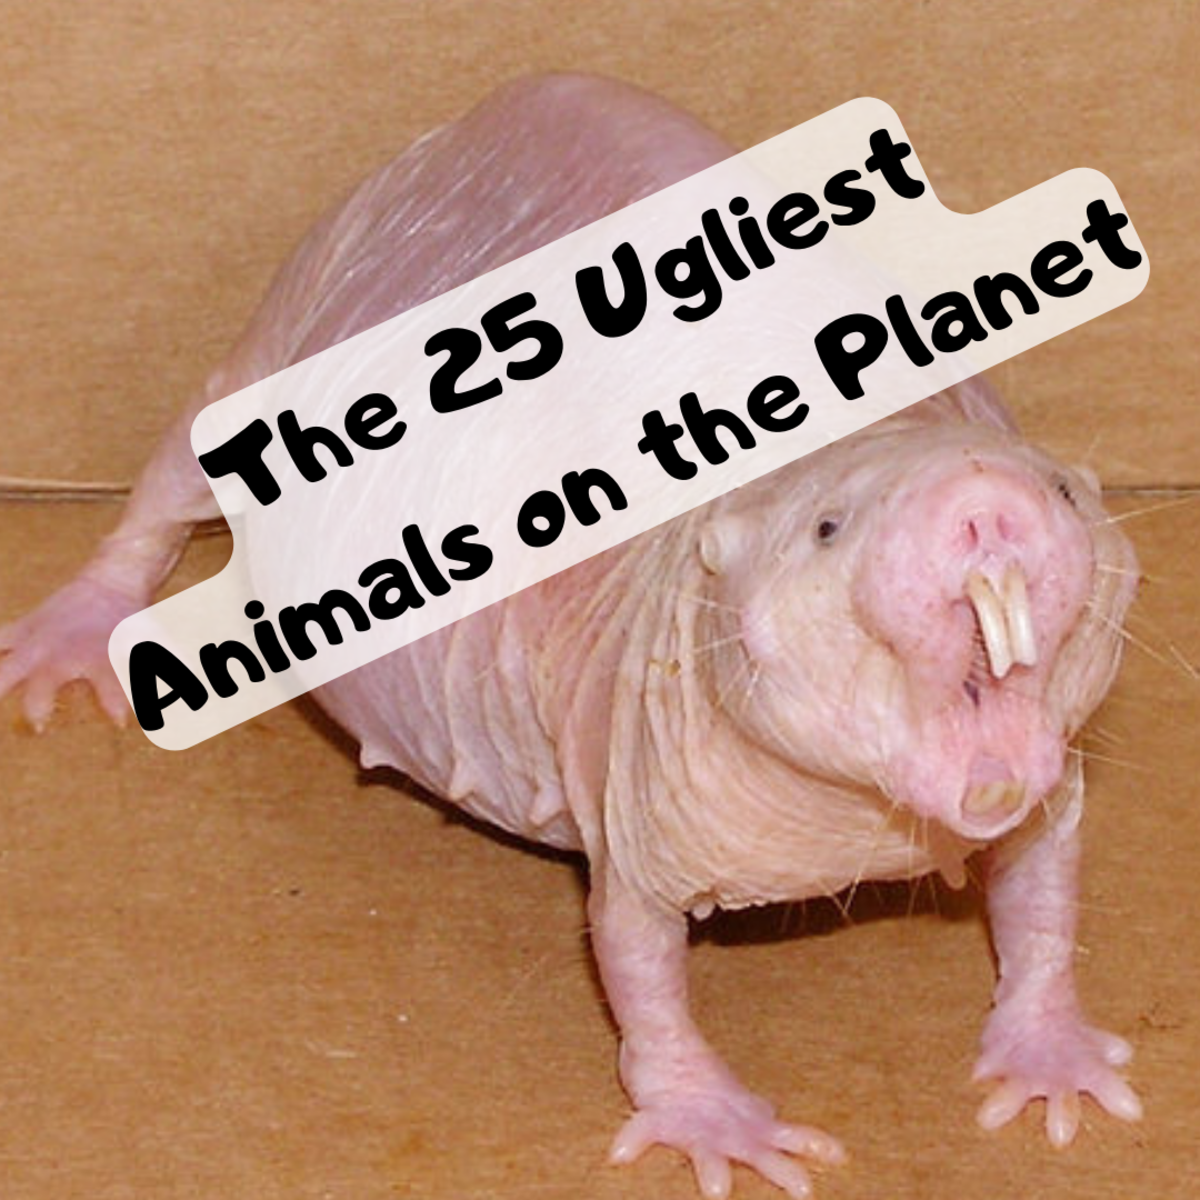 The Top 25 Ugliest Animals on Earth